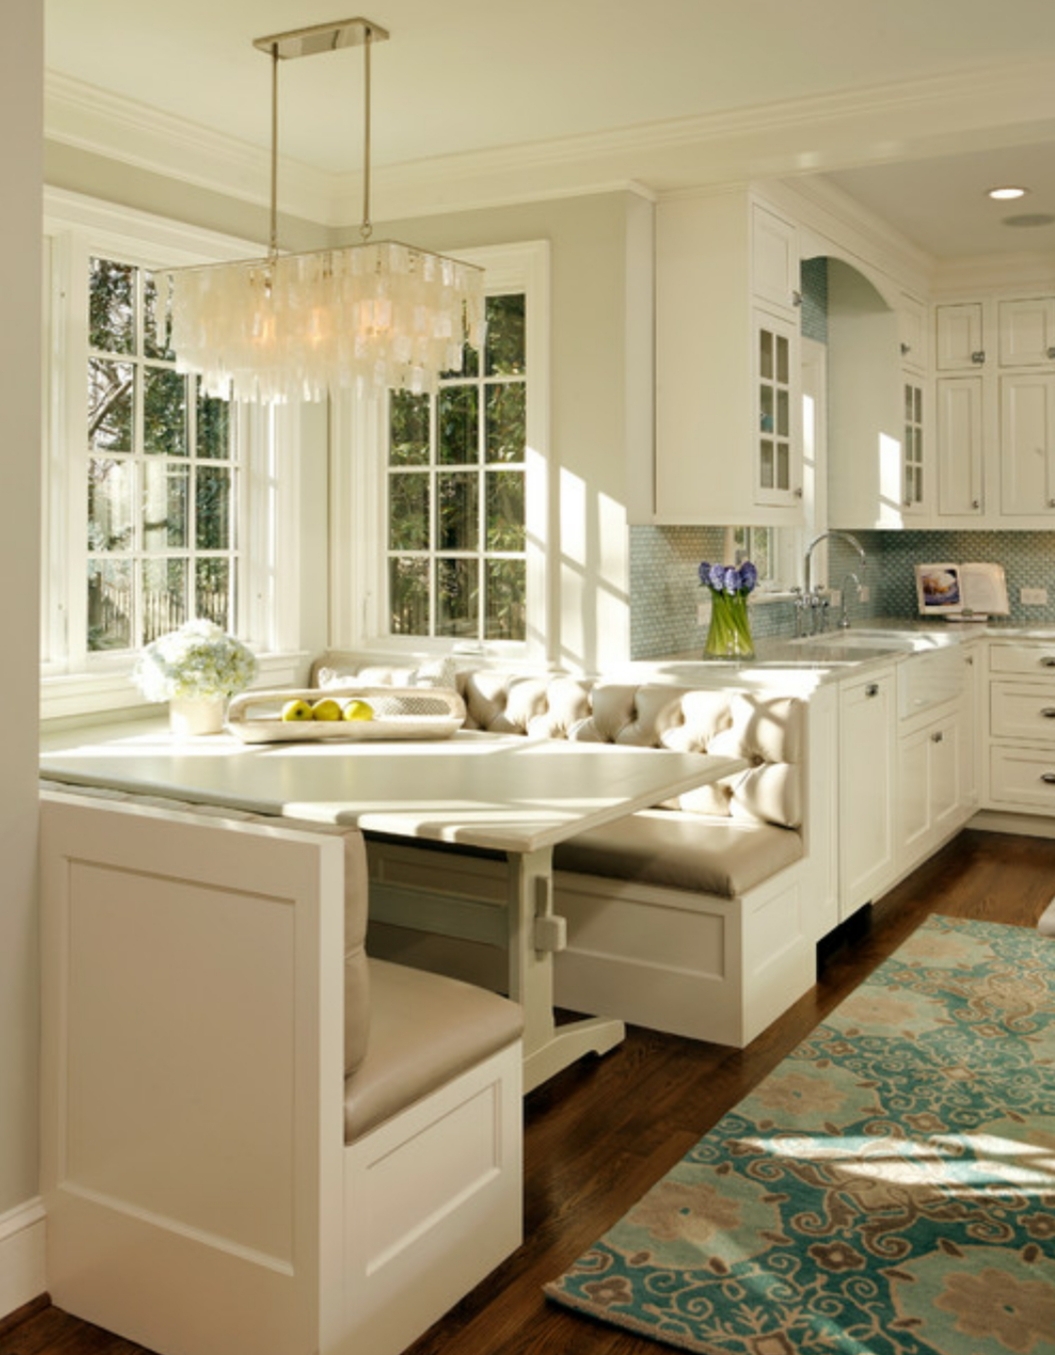 Kitchen Cabinet Painting and Cabinet Refinishing Denver - Painting